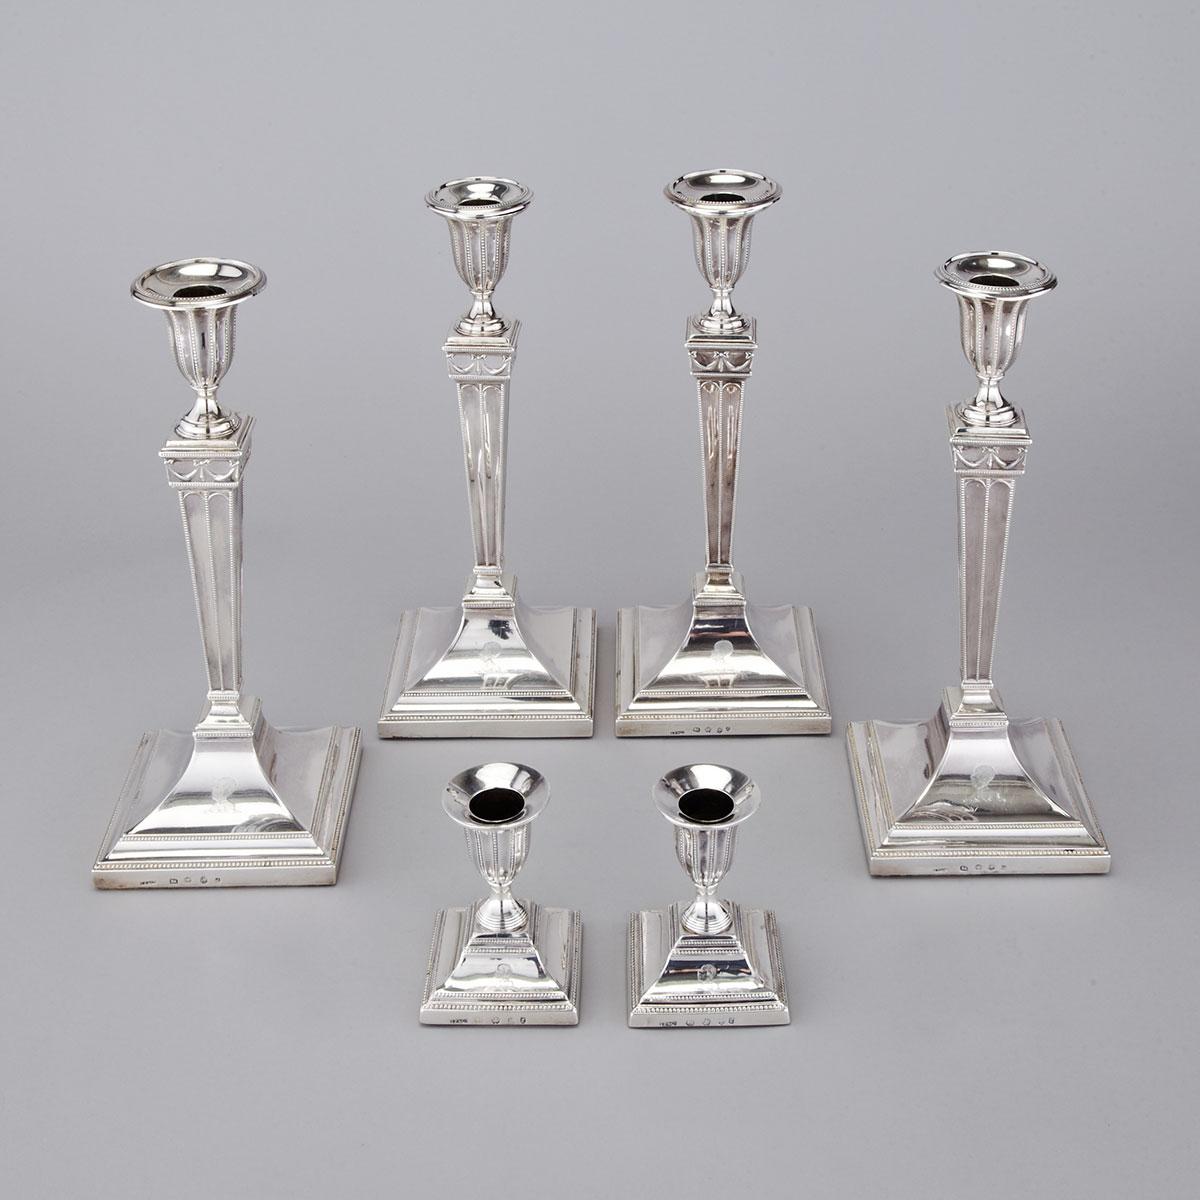 Set of Four George III Silver Candlesticks and Pair of Matching Smaller Candlesticks, John Parsons & Co., Sheffield, 1784